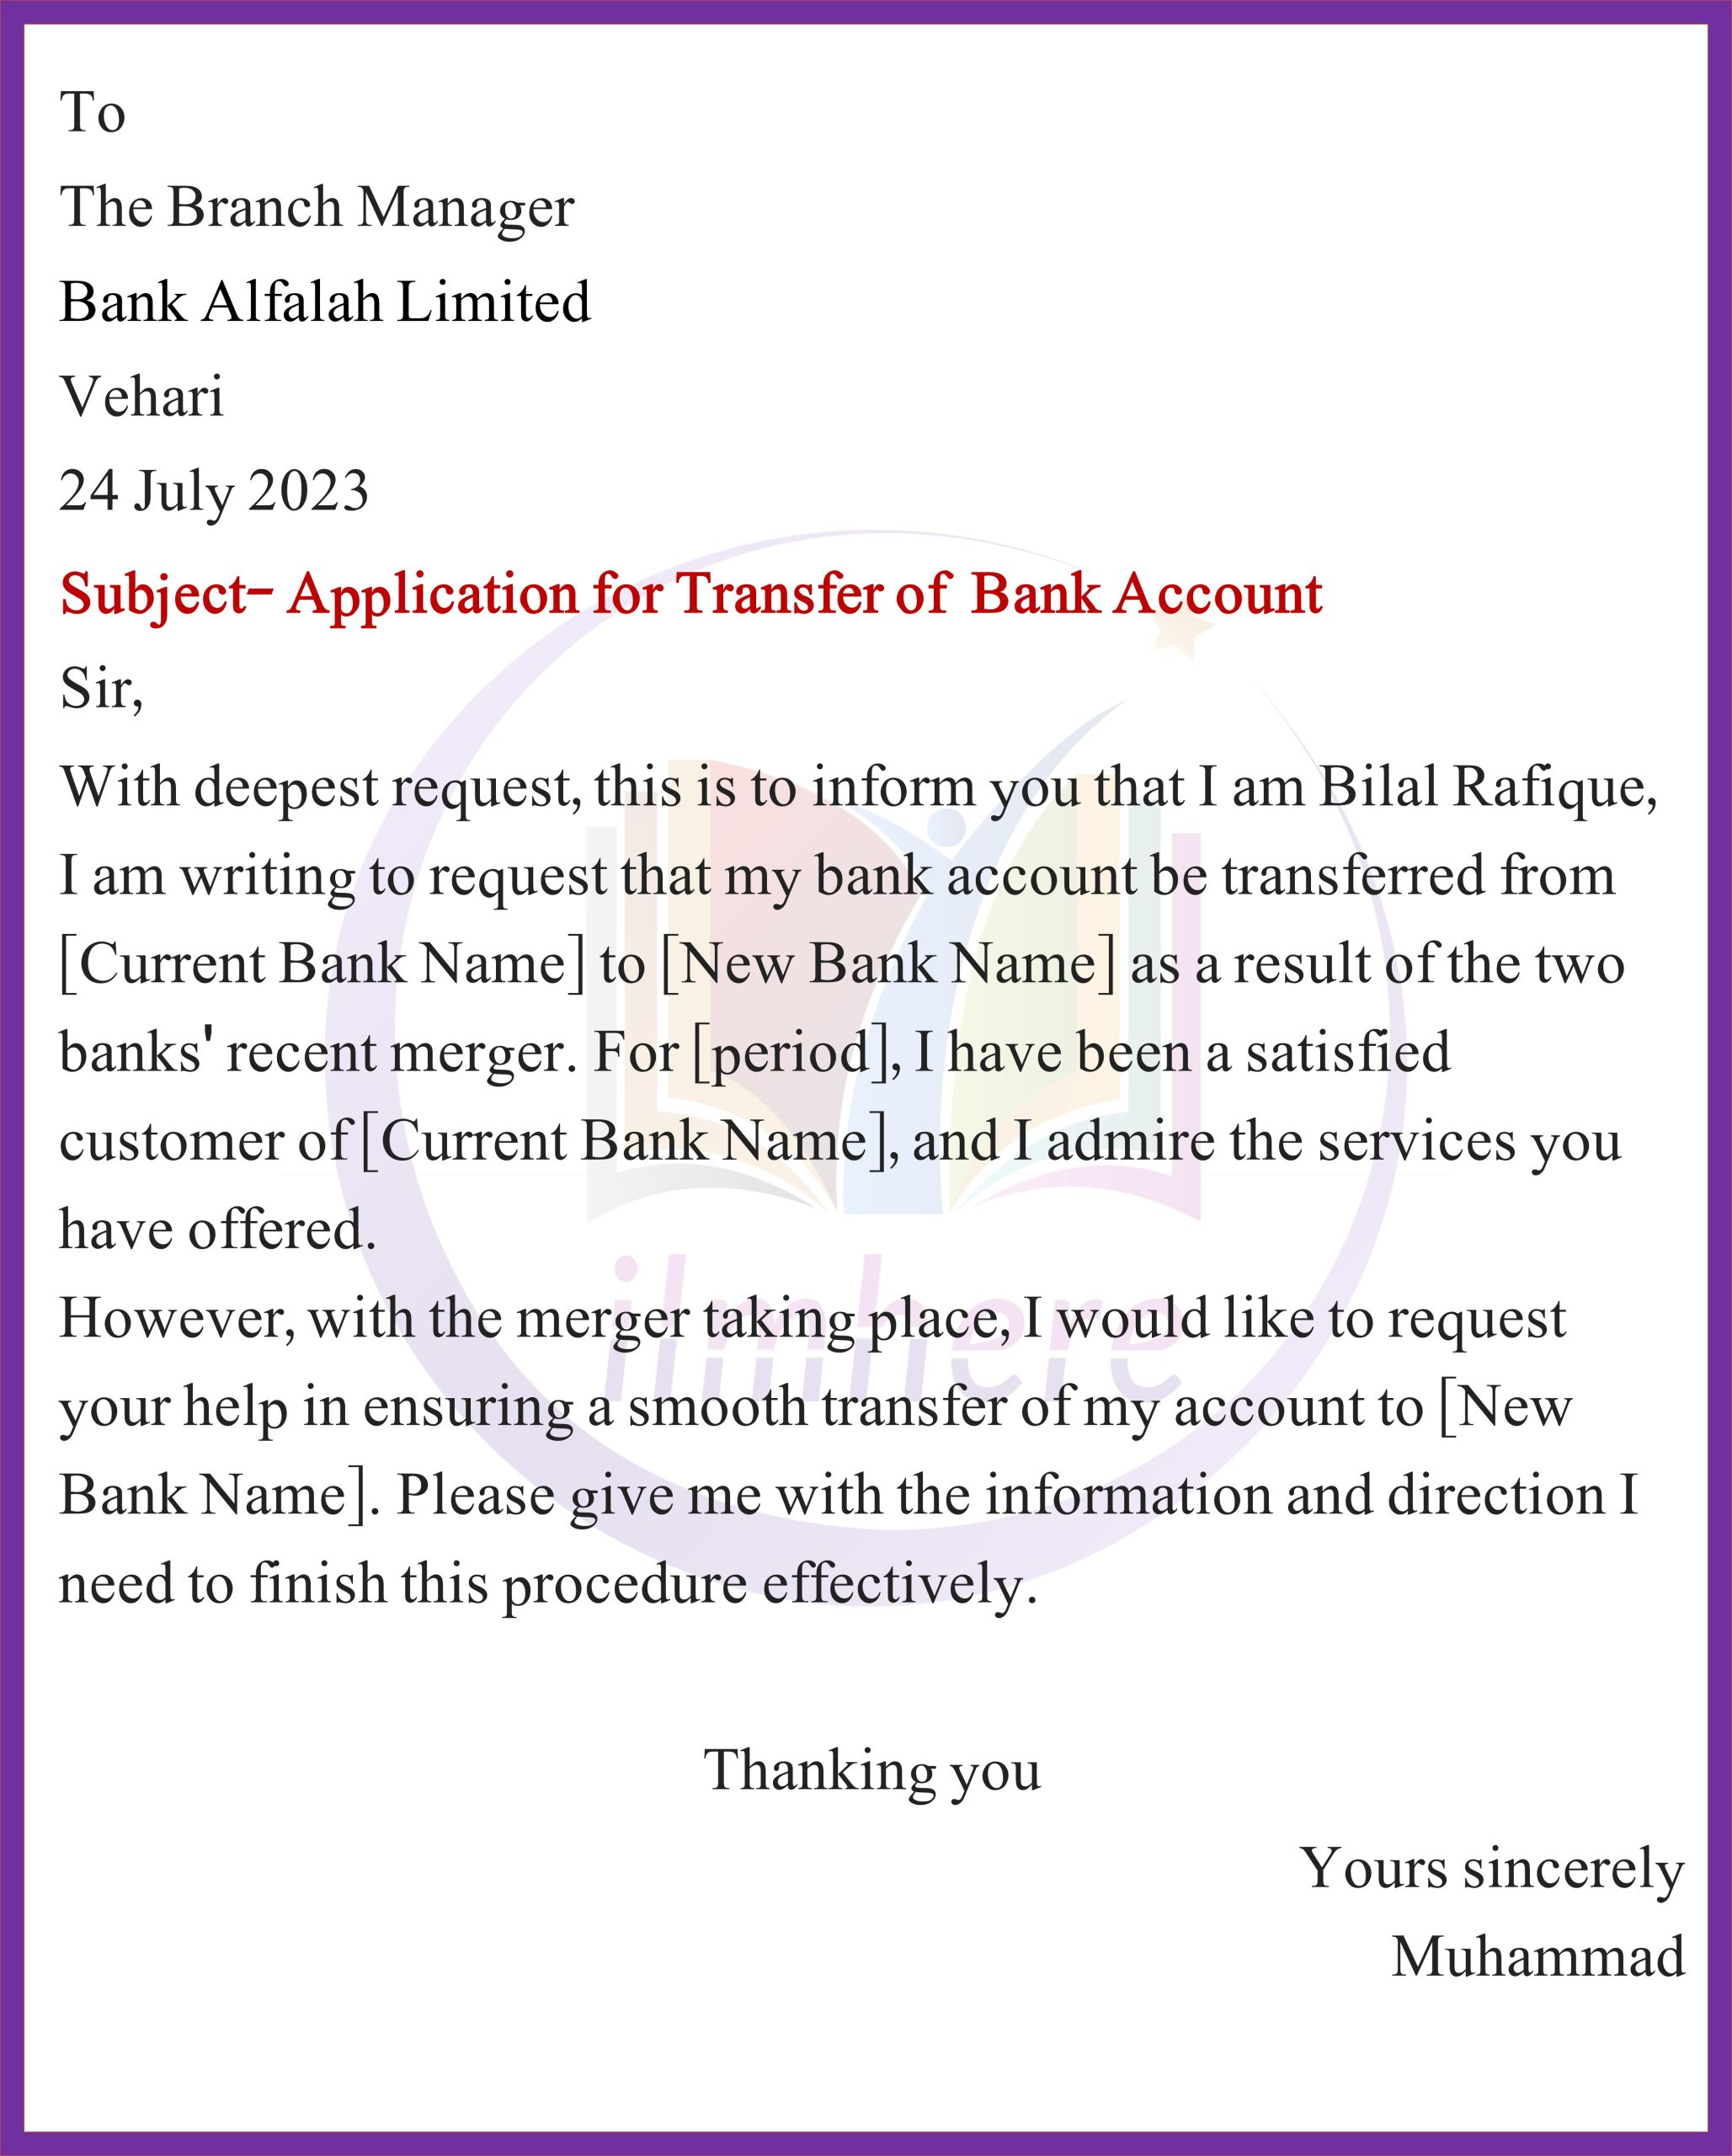 Request for Bank Account Transfer Due to Merging Accounts (BAL)